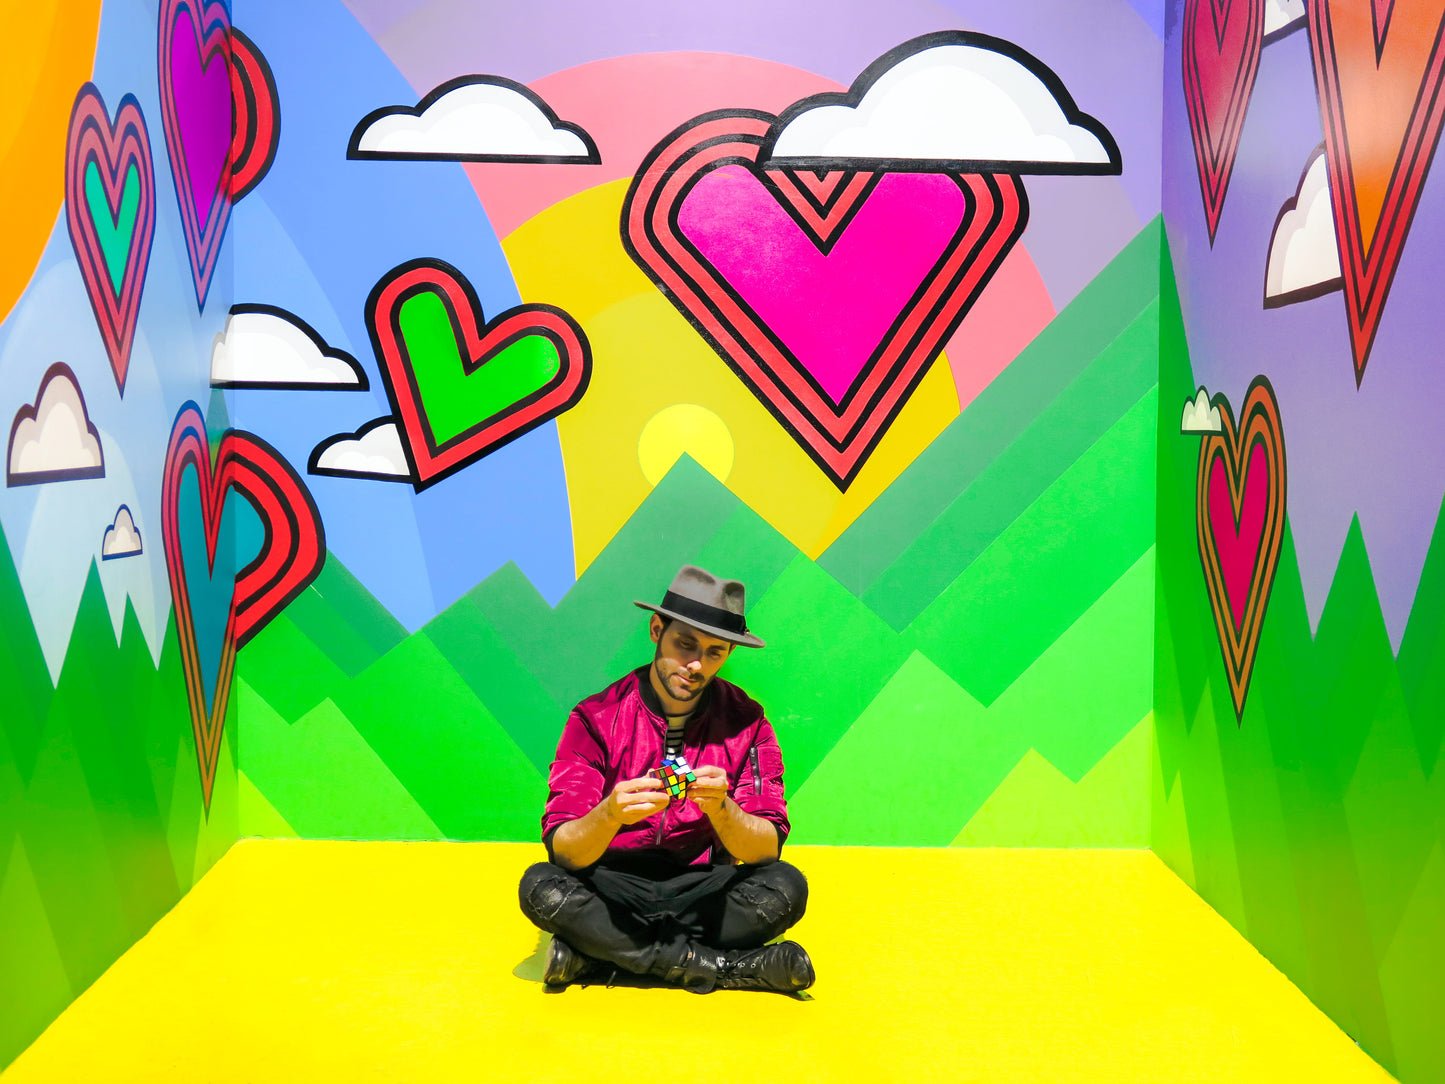 A man in a brightly colored jacket sits alone in a brightly-painted room, solving a Rubik's cube.